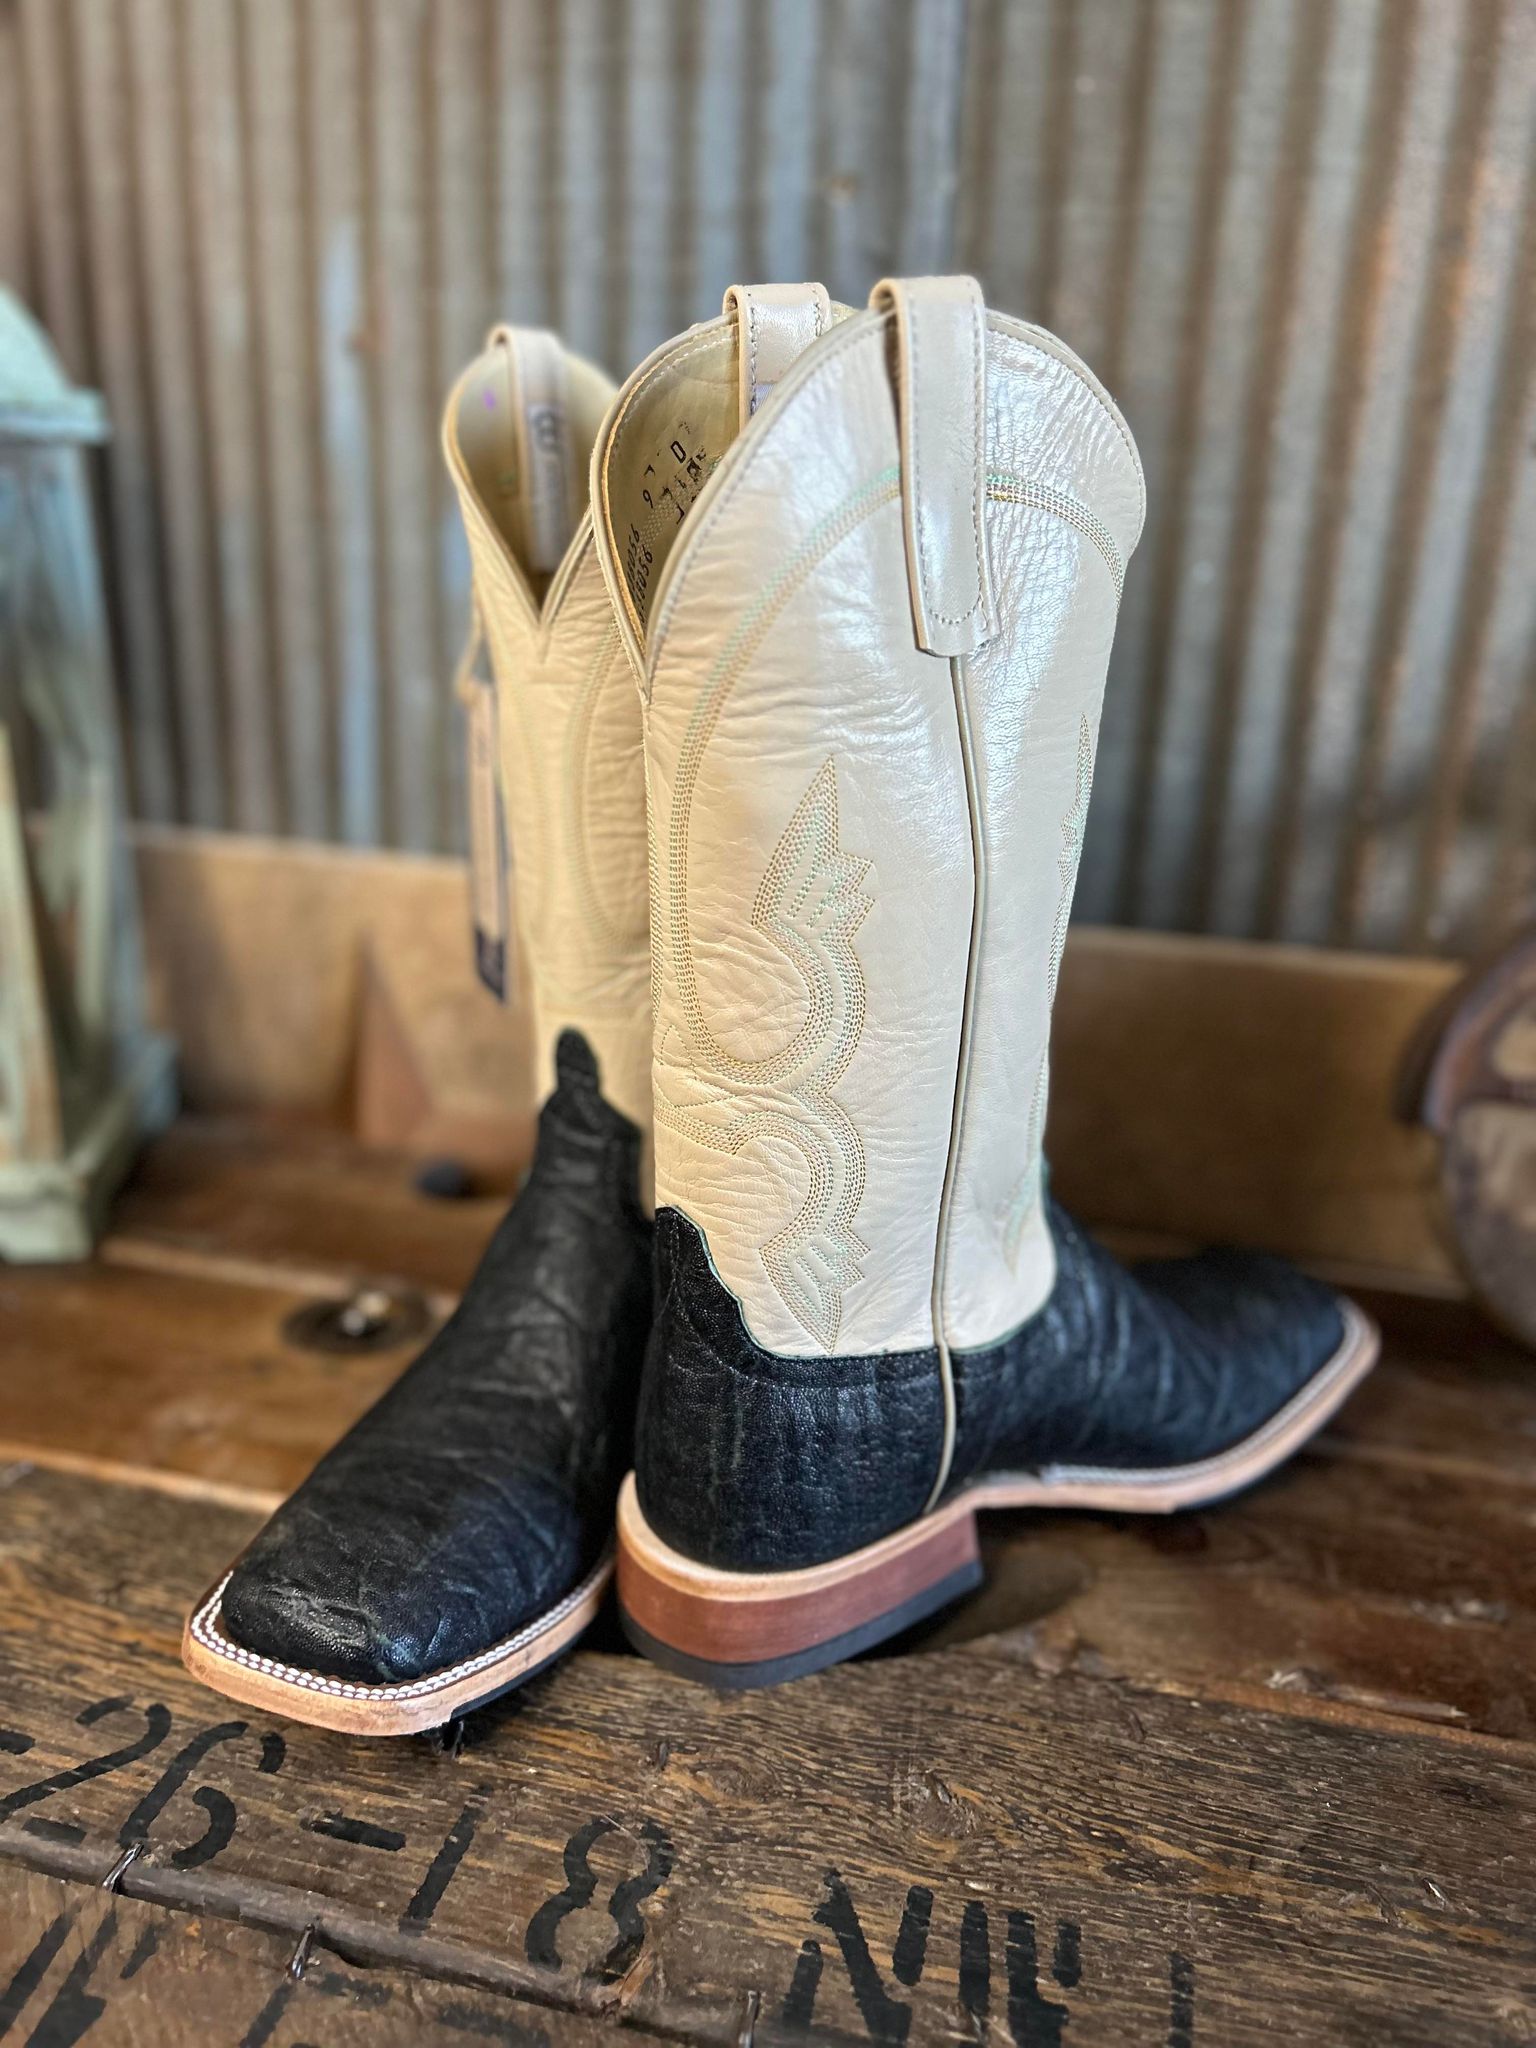 Anderson Bean Olive Vintage Elephant & Chanel Kidskin Boots-Men's Boots-Anderson Bean-Lucky J Boots & More, Women's, Men's, & Kids Western Store Located in Carthage, MO